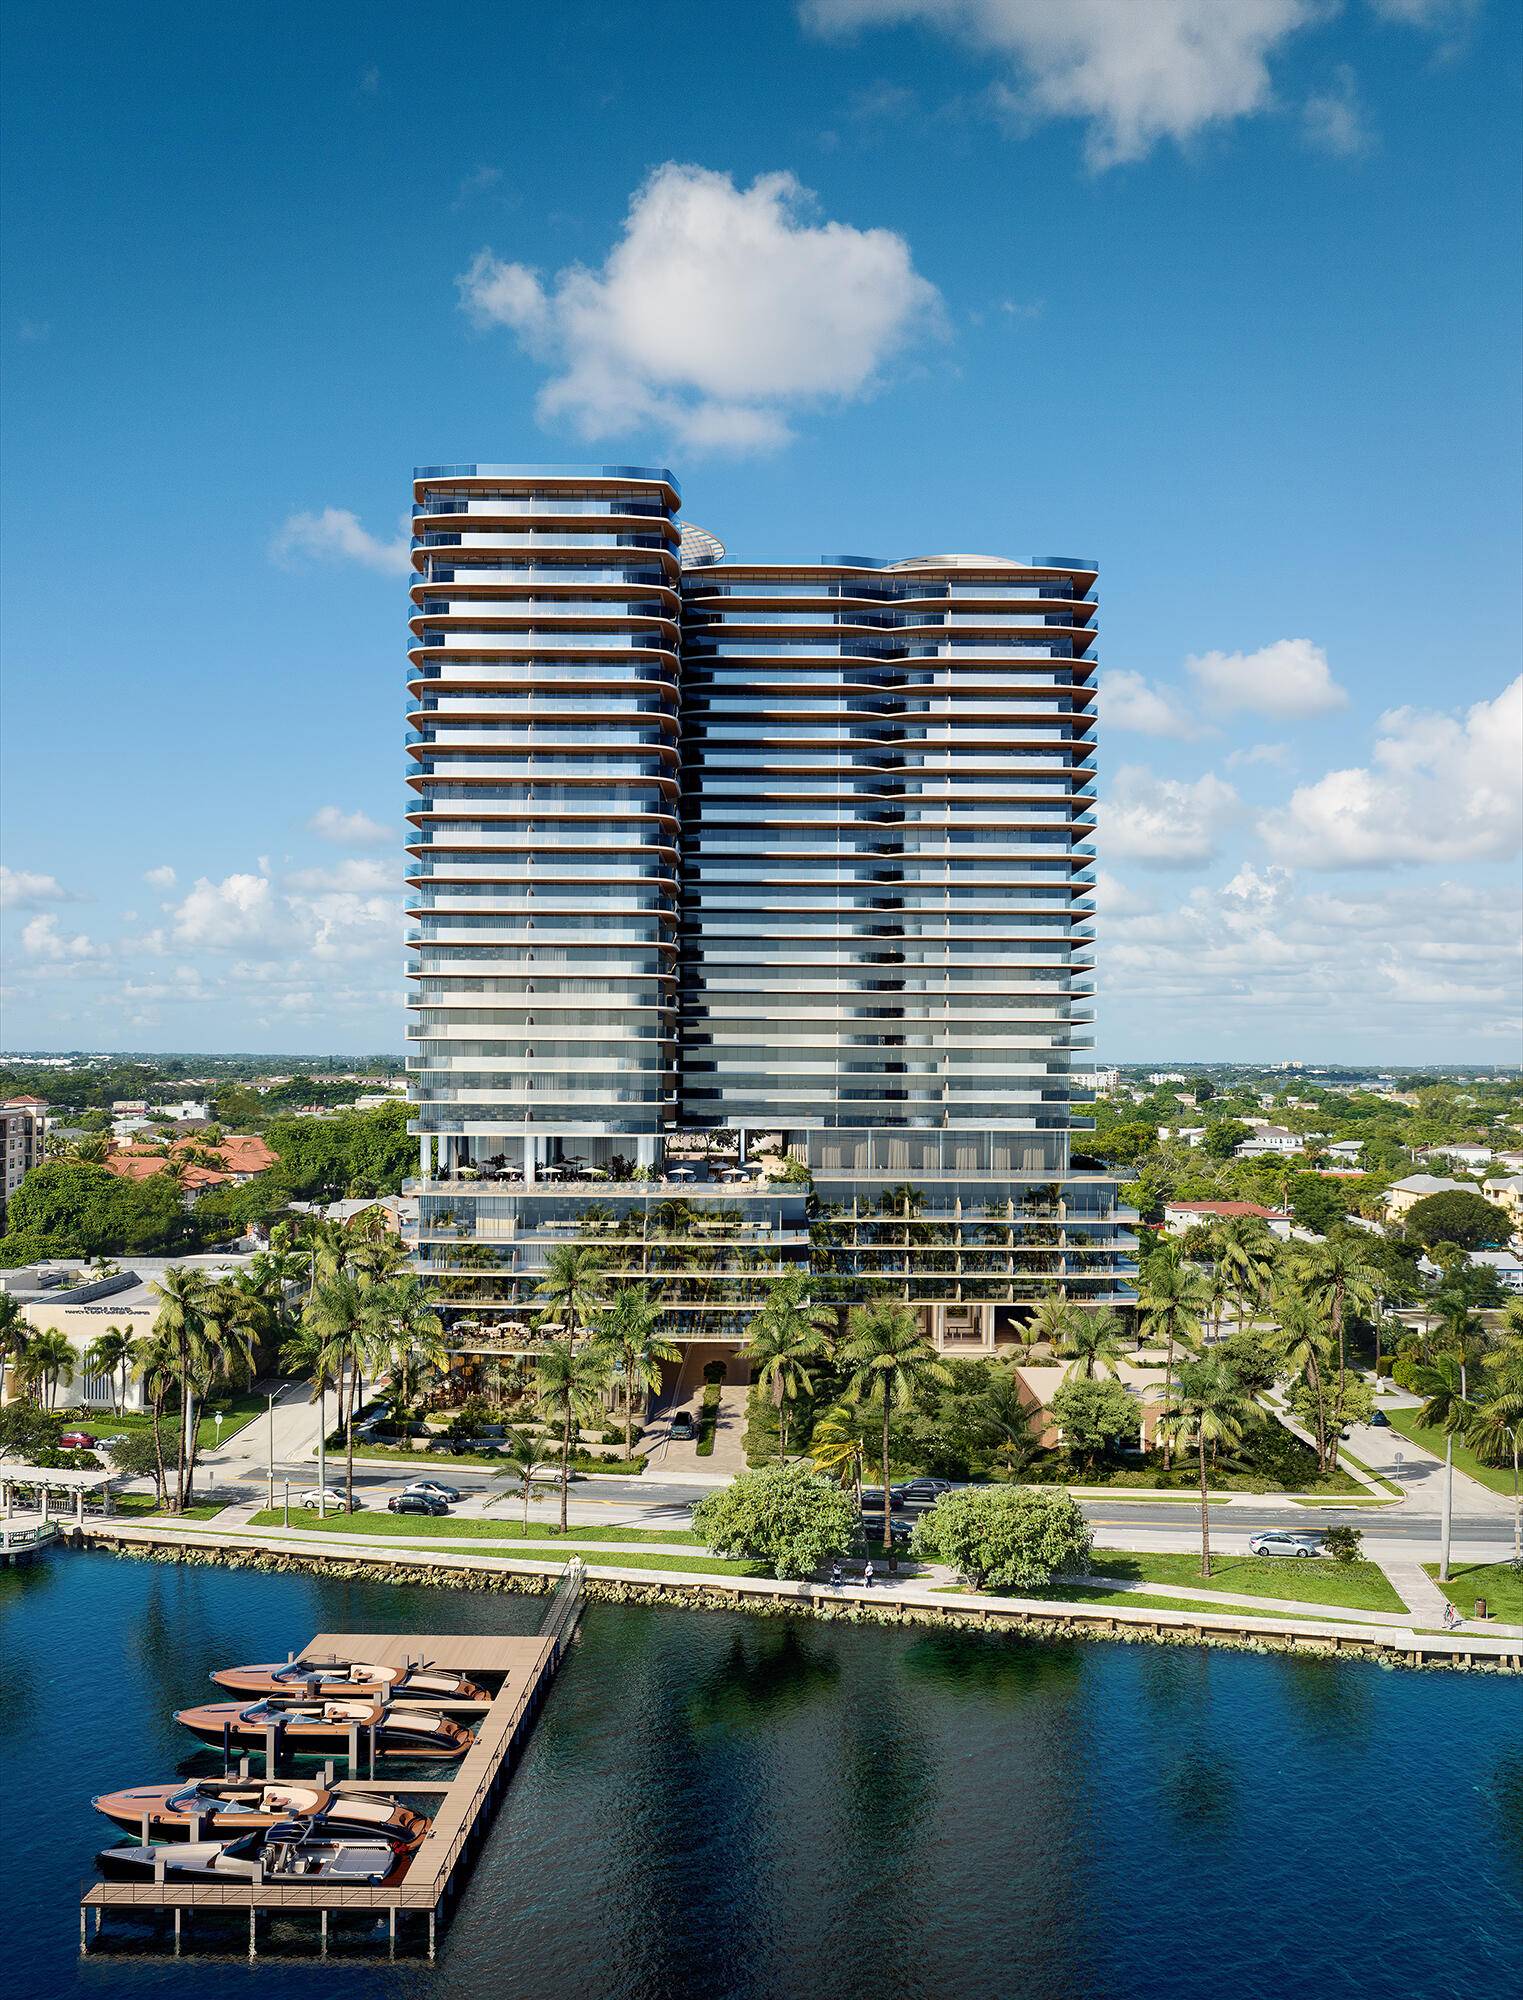 In its preconstruction phase, Olara will rise 26 stories along the Intracoastal waterway, only one mile from Palm Beach Island and downtown West Palm Beach.